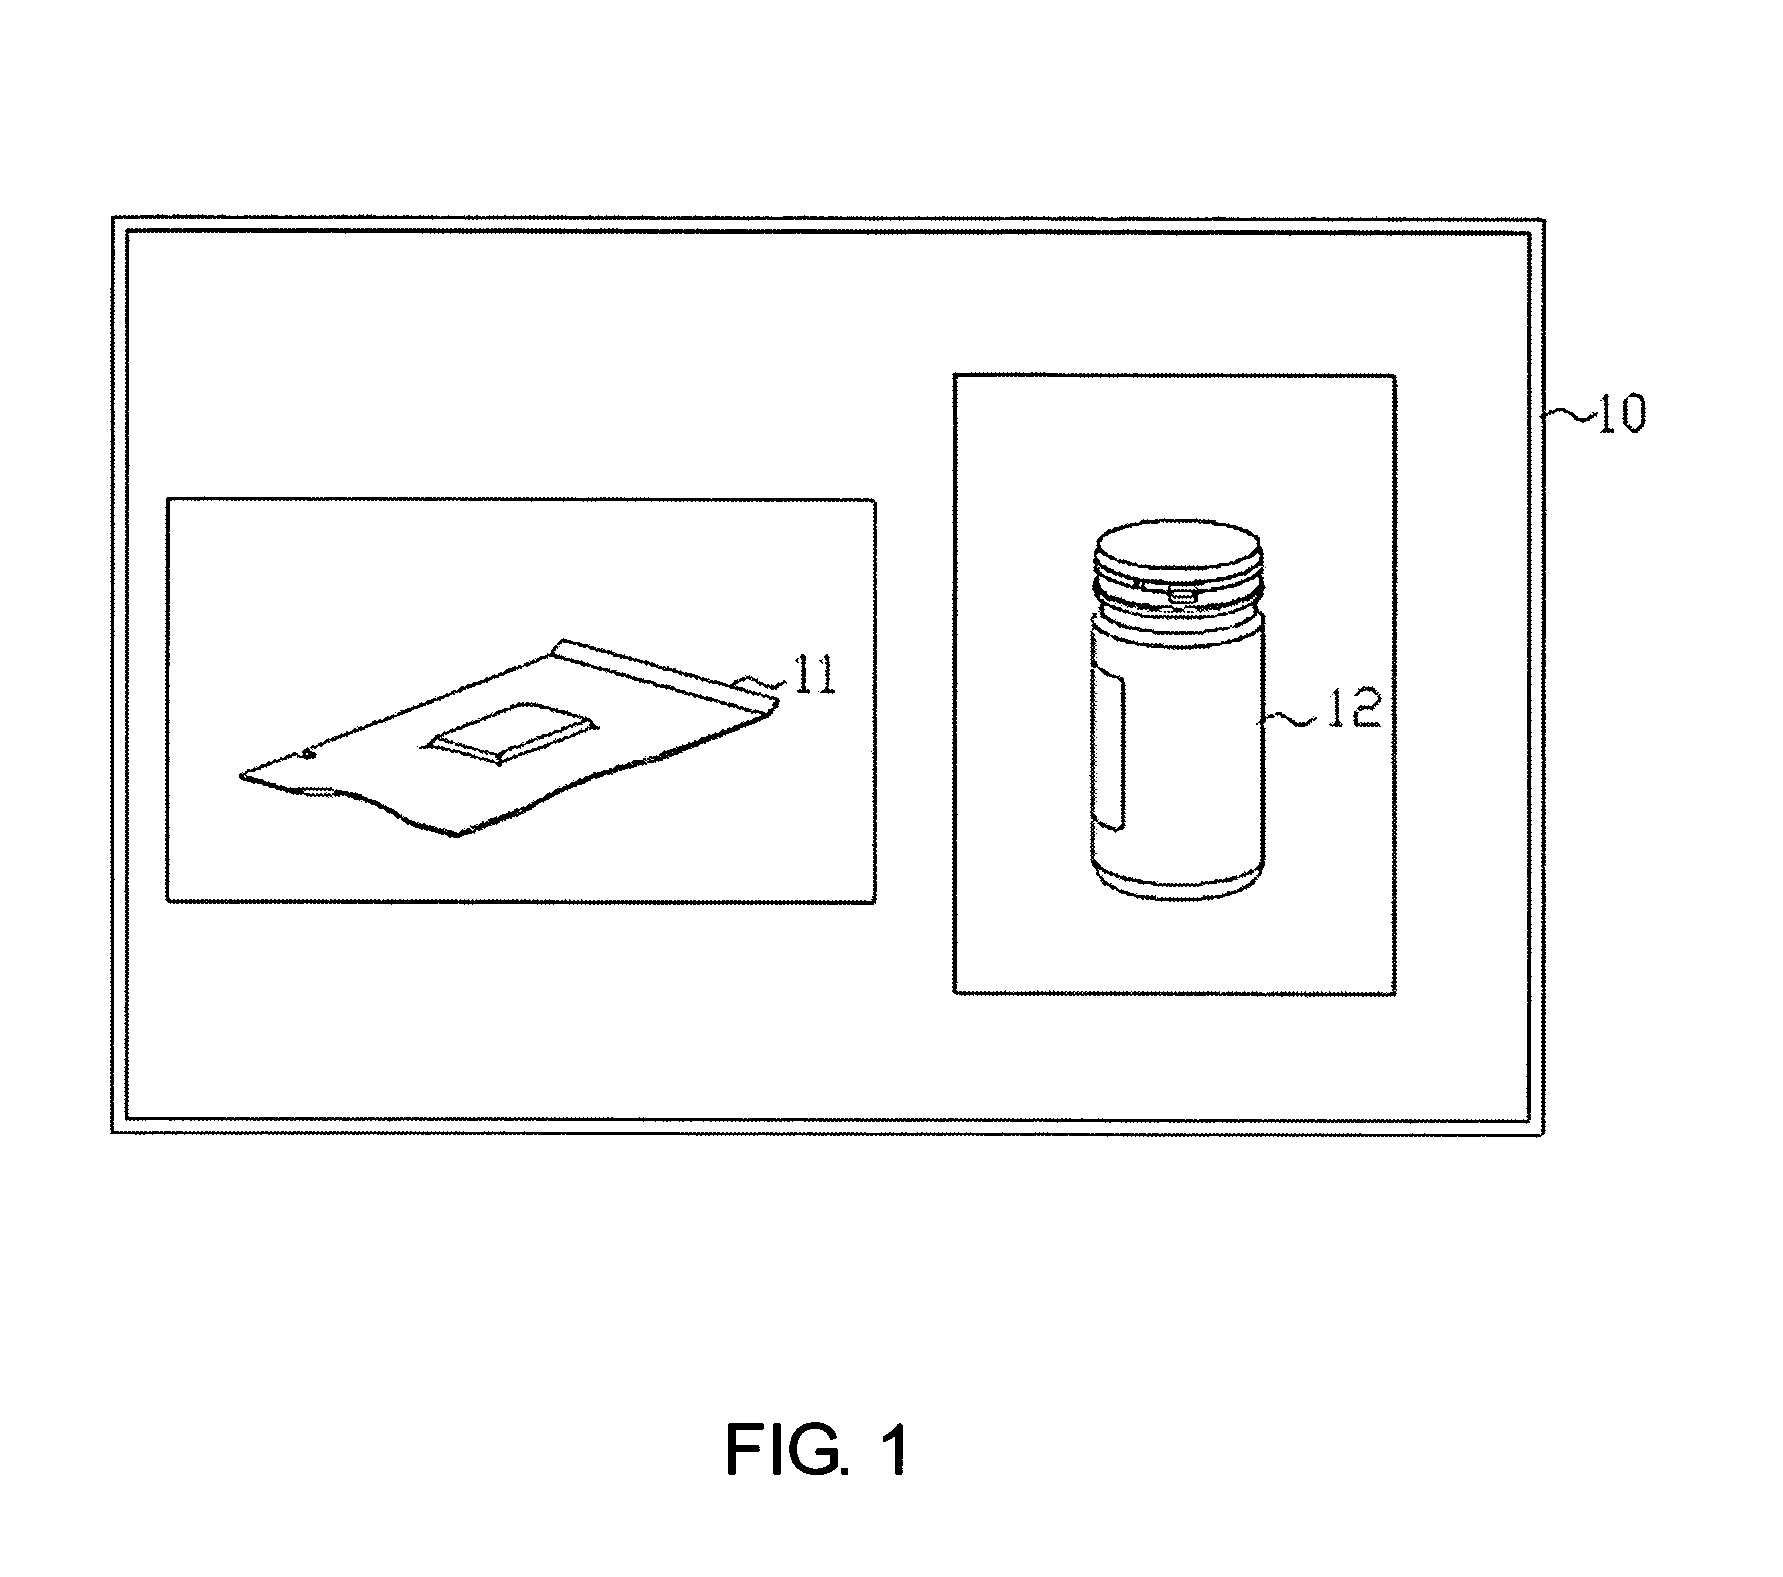 Complex face mask and methods of preparation thereof